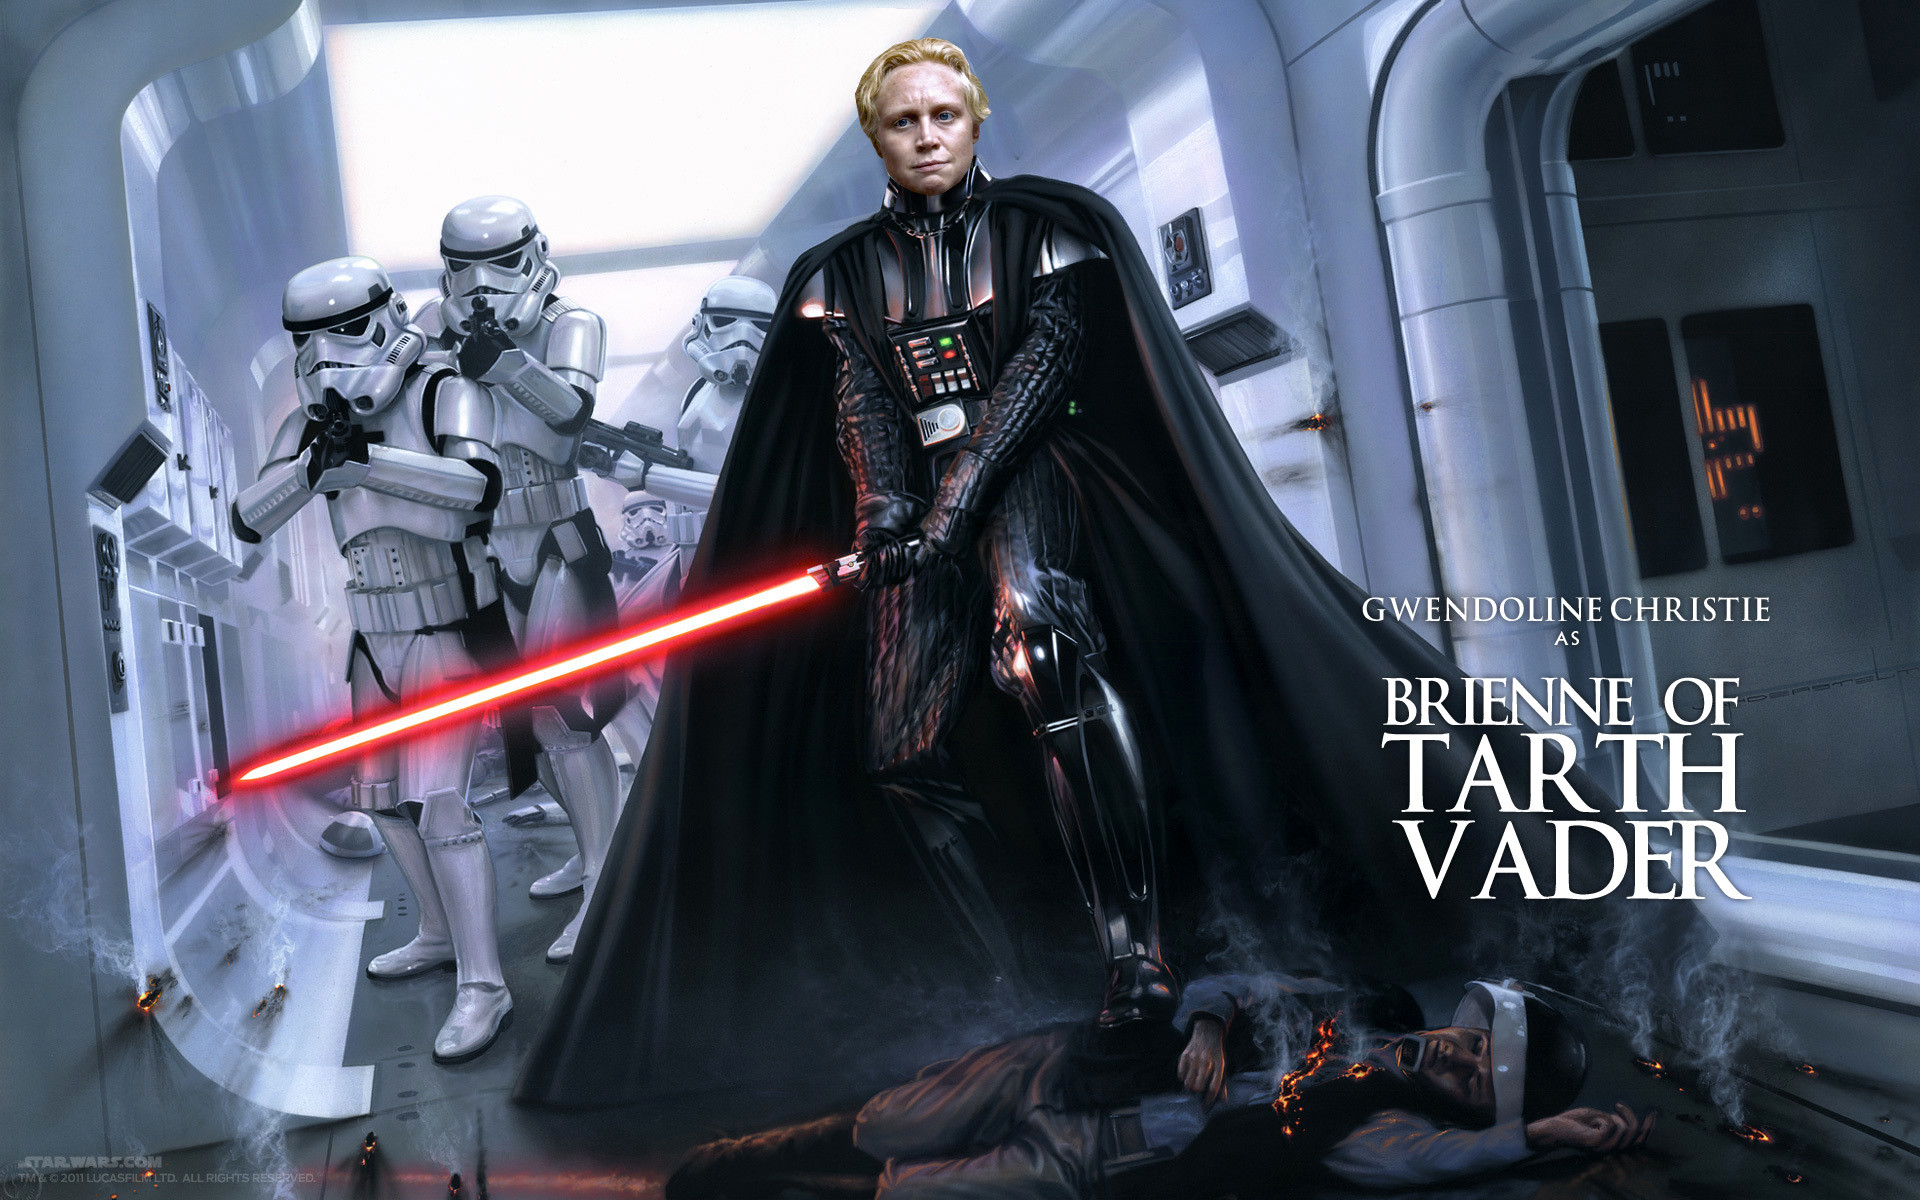 Gwendoline Christie it was my first tought to be honest